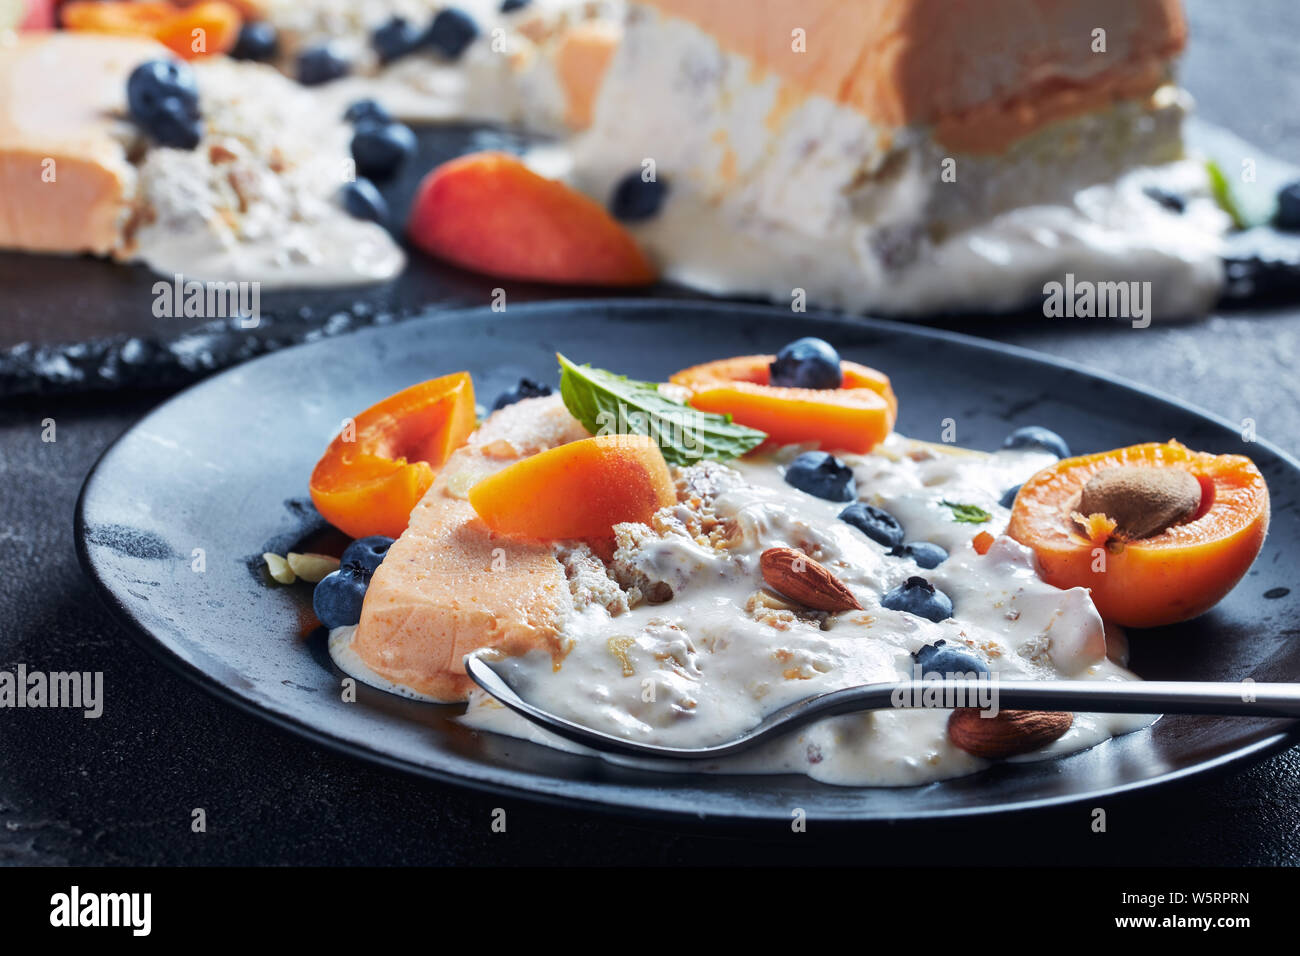 Italian summer dessert, Sicilian Almond apricot melon Semifreddo served on a black plate with fruits and berries, view from above, close-up Stock Photo